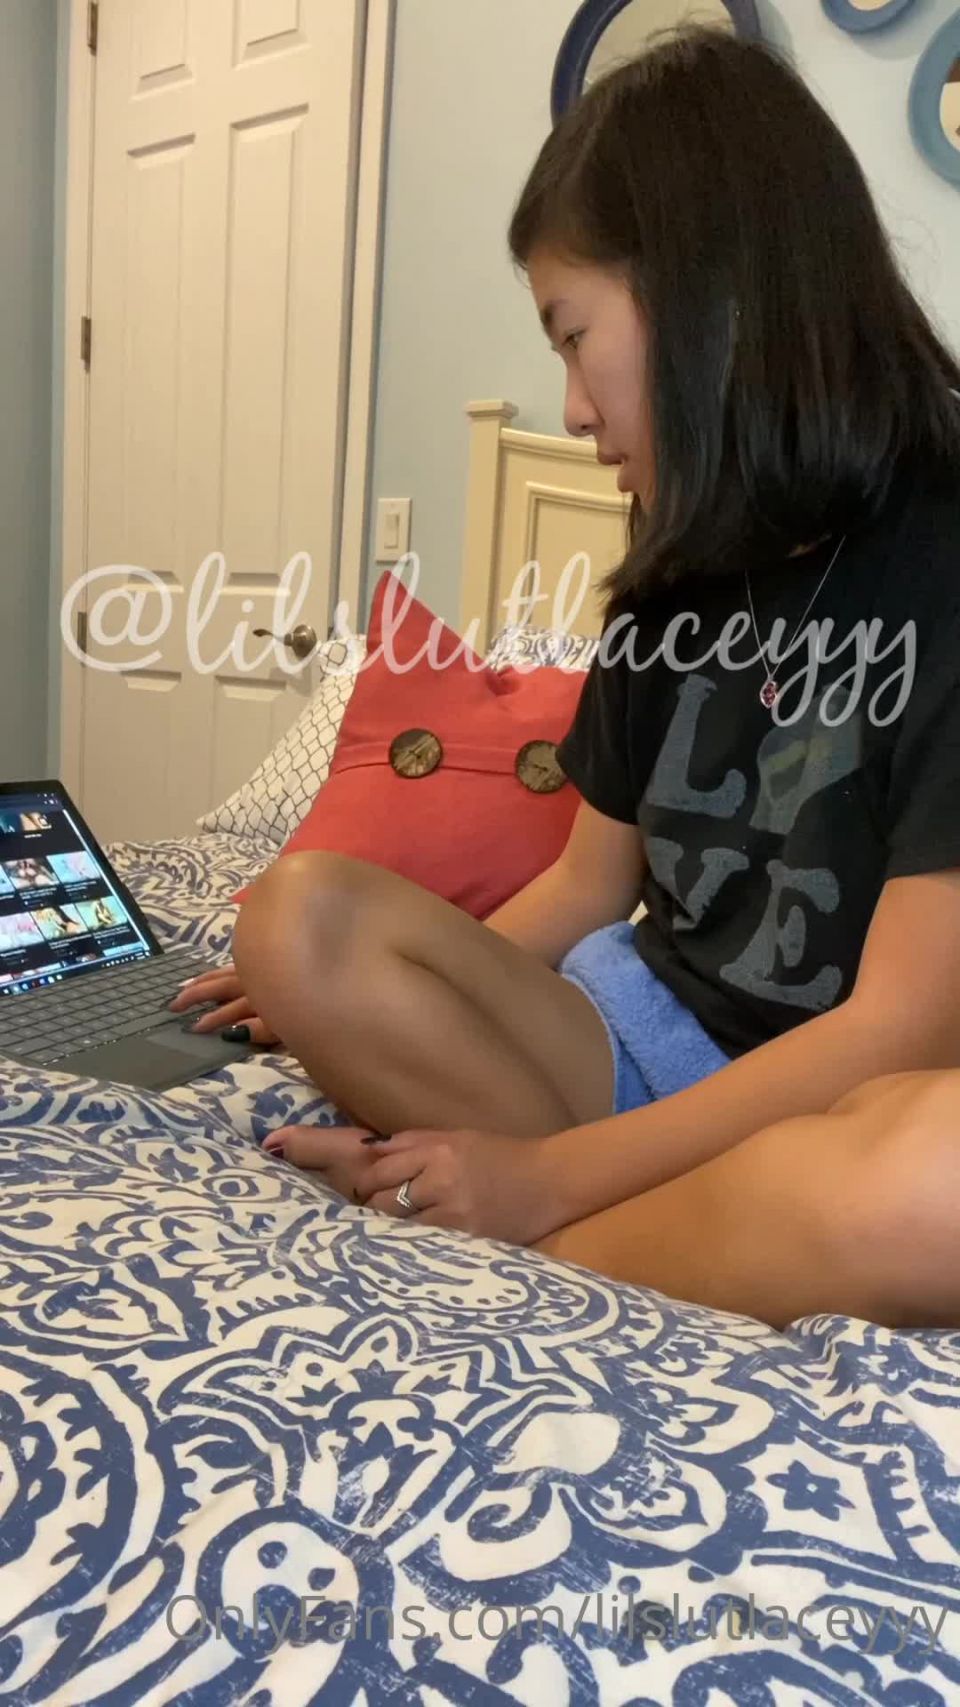 Onlyfans - Slutty Asian Princess - lilslutlaceyyy - lilslutlaceyyy watching porn POV me watching dp porn before bed - 06-10-2020.